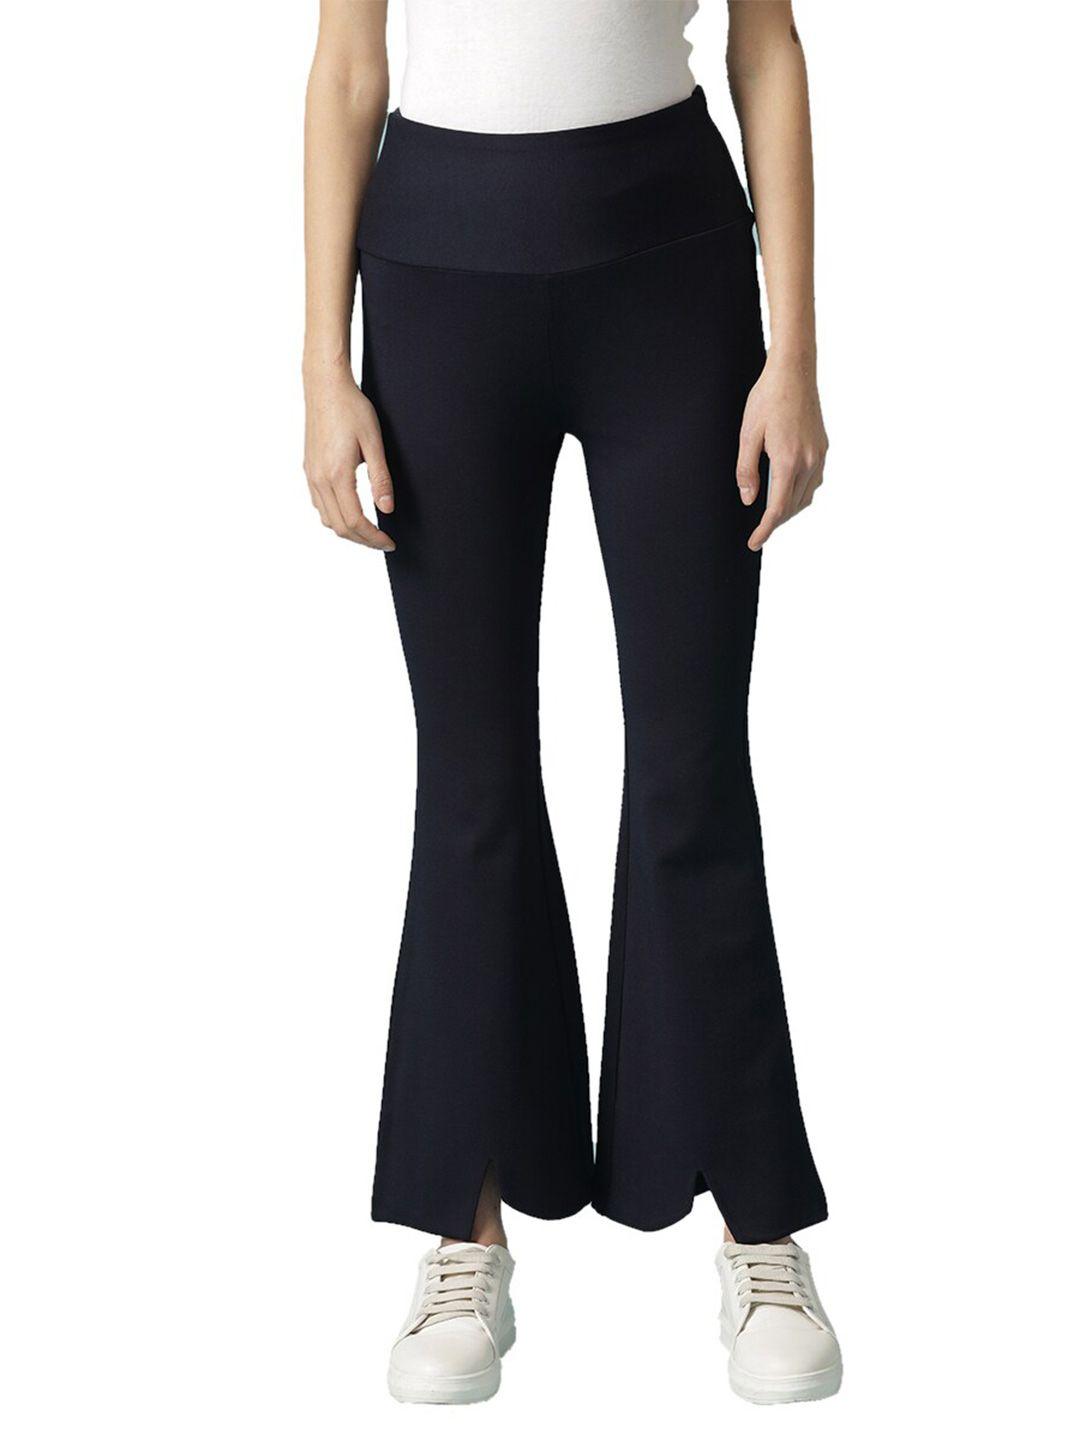 gipsy women navy blue solid boot cut jeggings